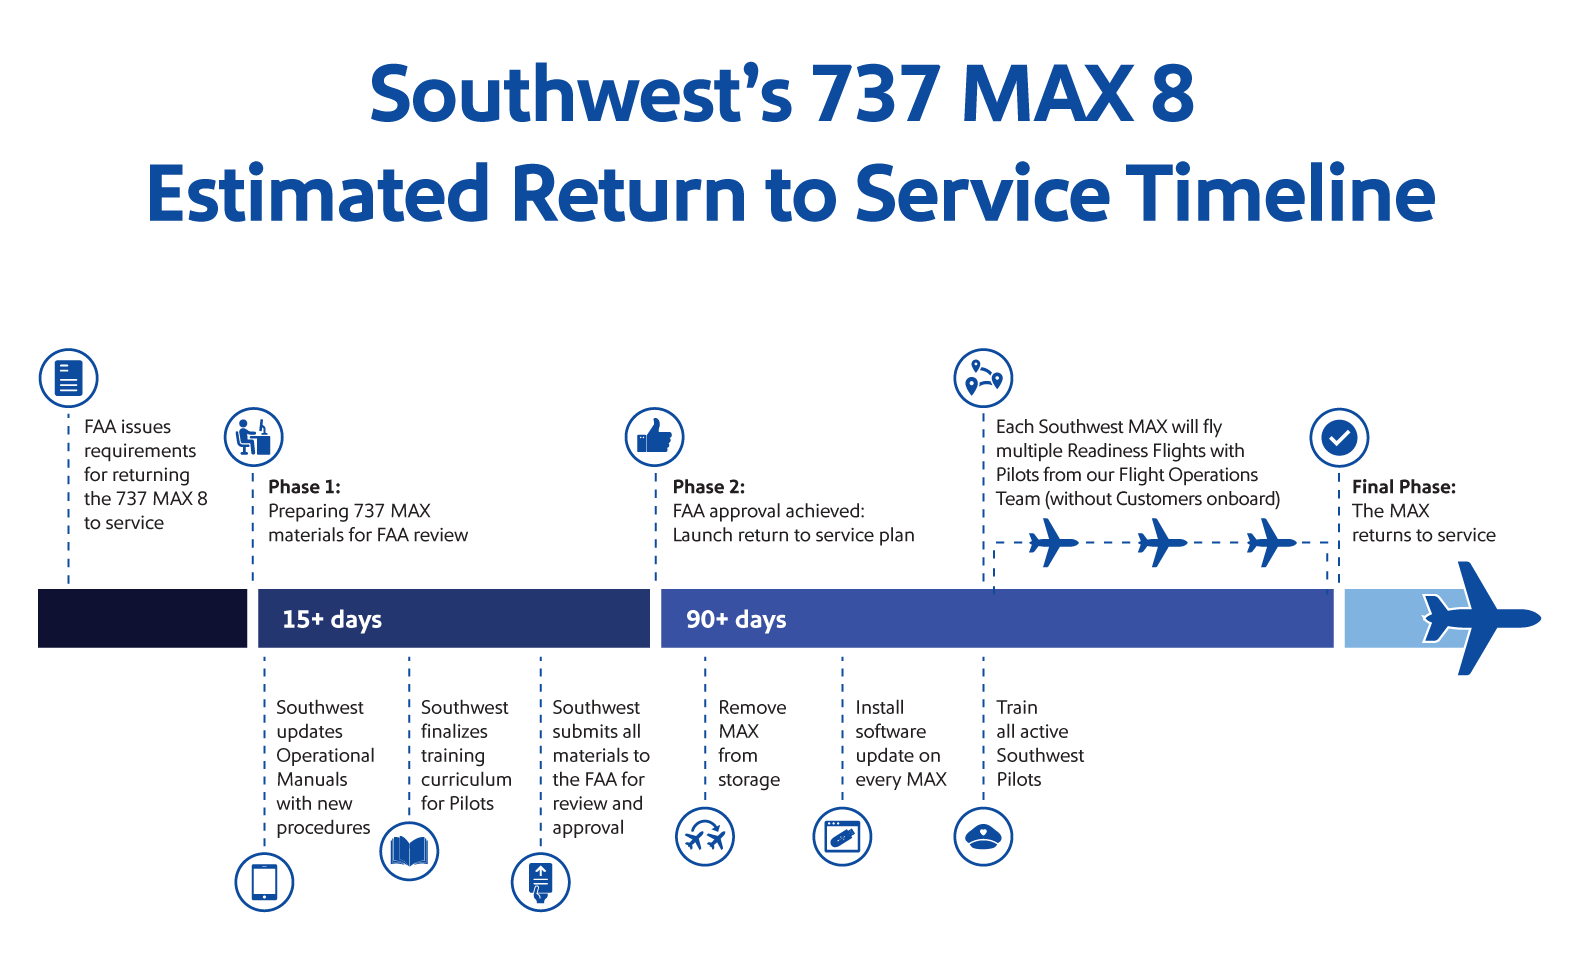 Southwest Airlines Estimated 737 MAX 8 Return to Service Timeline